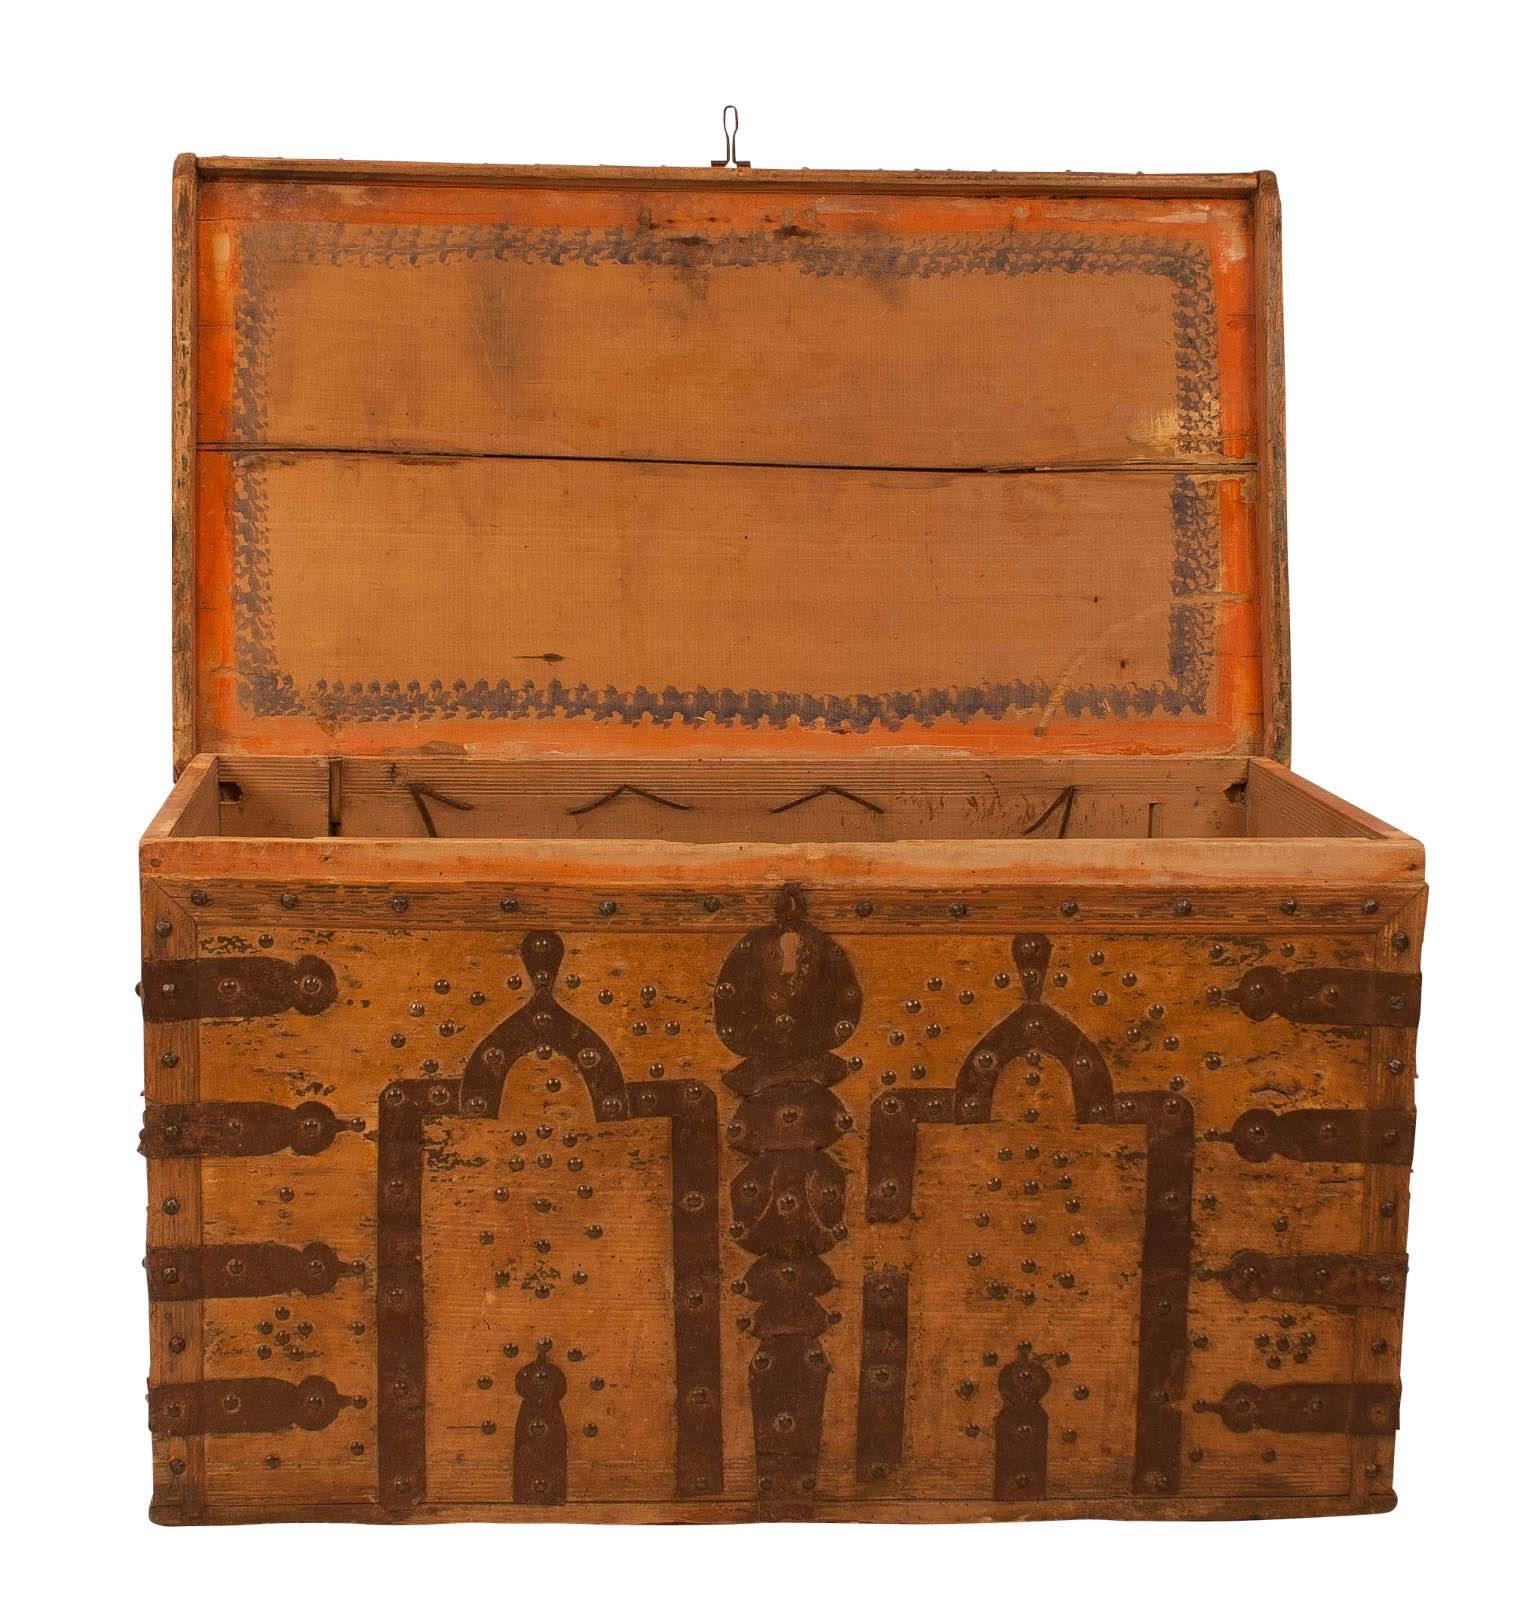 19th century Spanish Colonial trunk. Appears to be cedar with iron hardware and decoration. A great rustic piece in substantially original condition. Useful at the foot of a bed, as a coffee or side table. We date this to circa 1850.